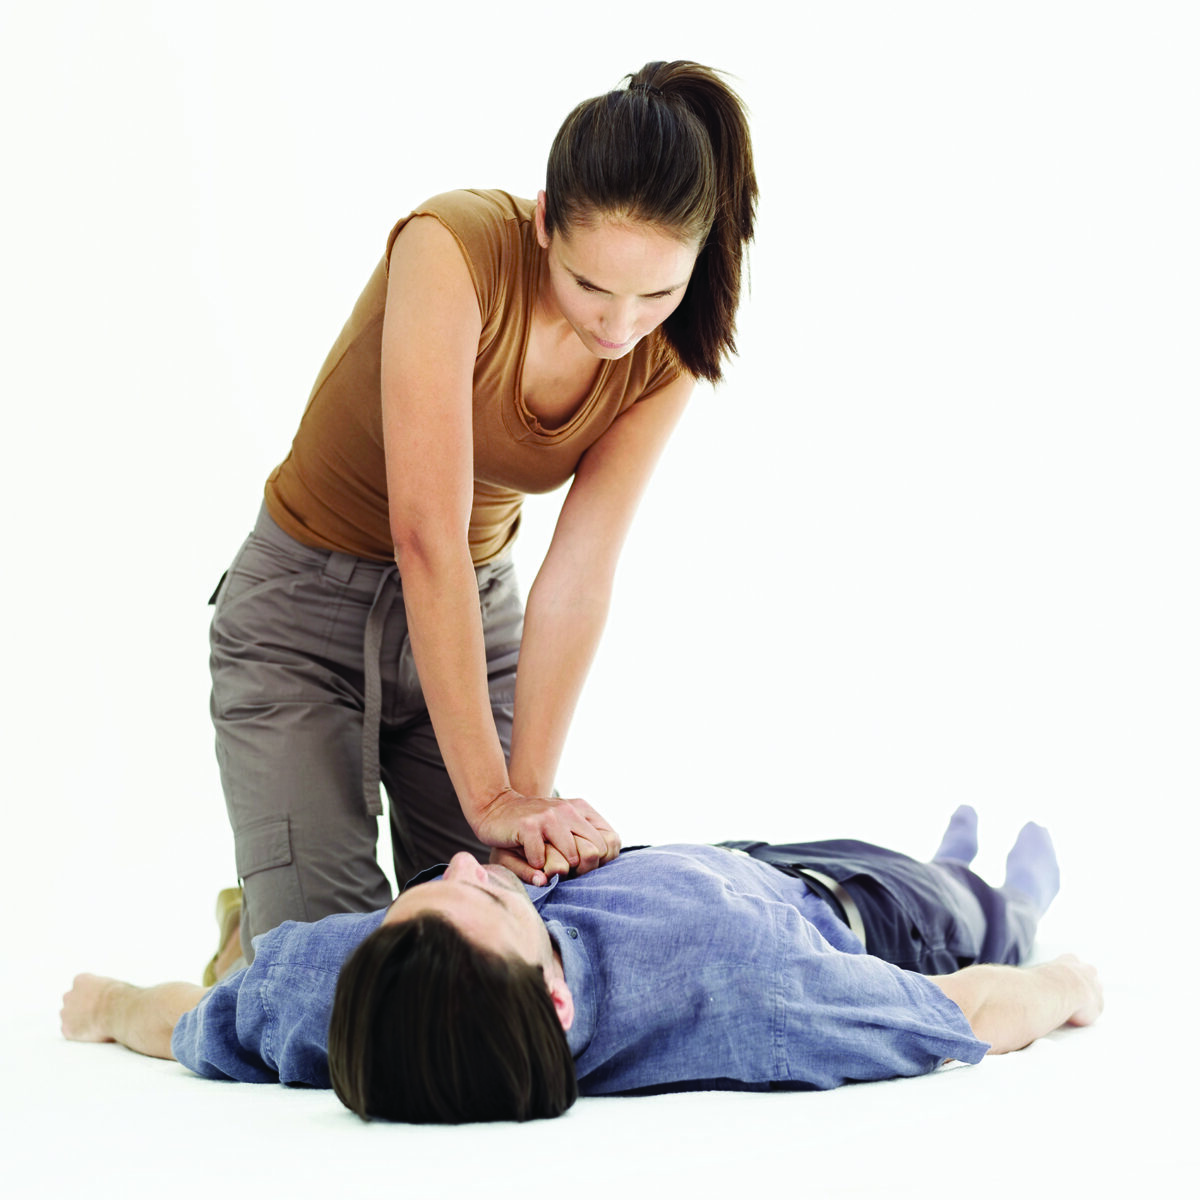 Learning hands-only CPR can save a life